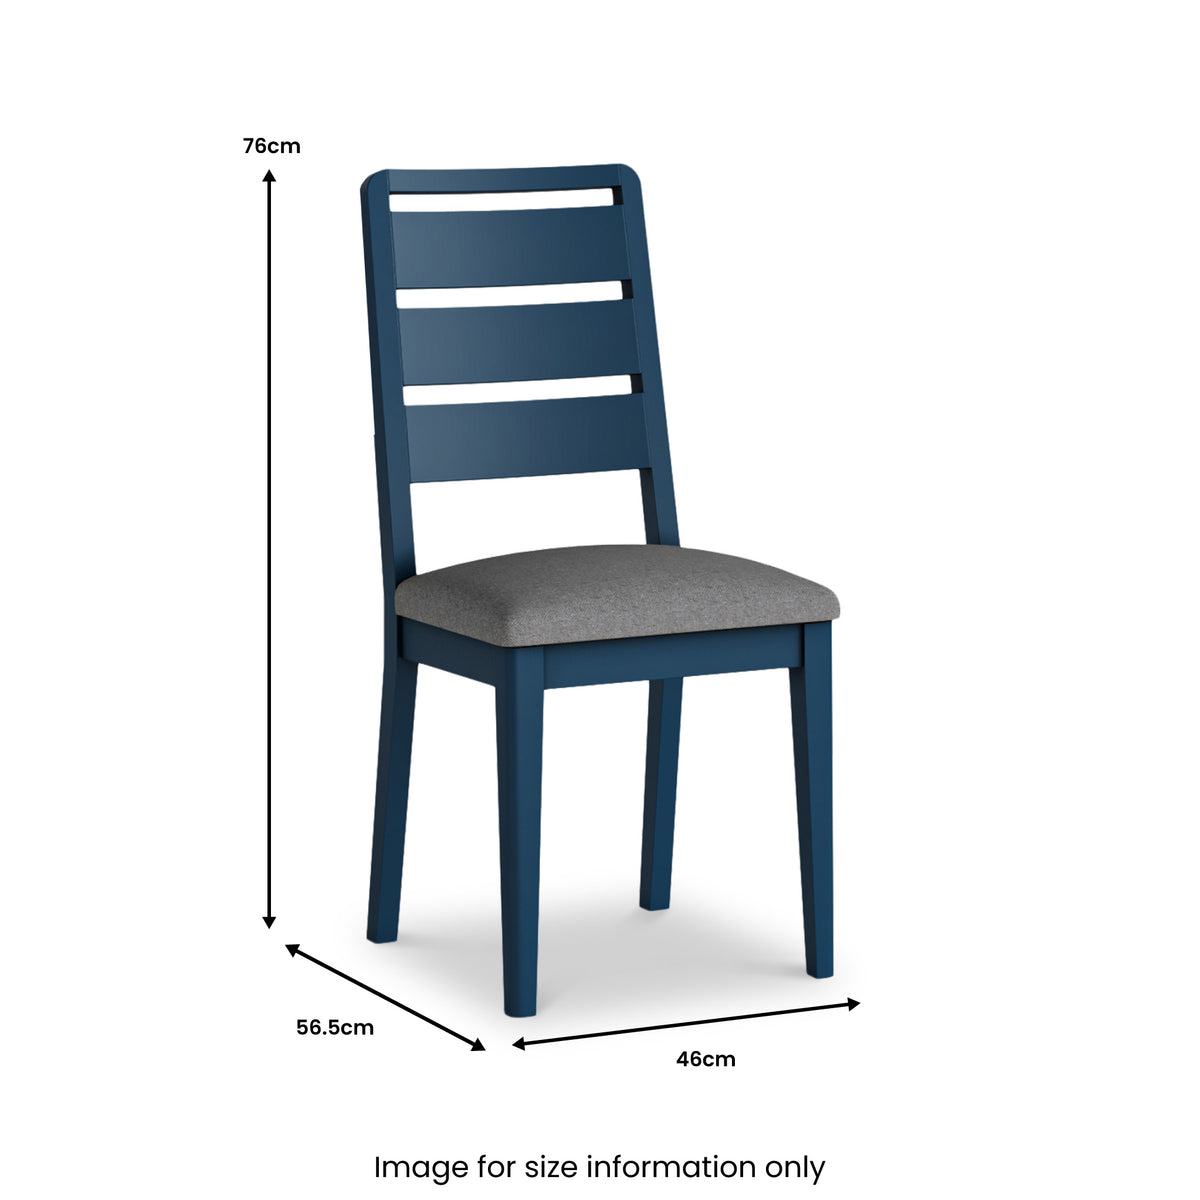 Penrose Ladder Back Dining Chair Dimensions